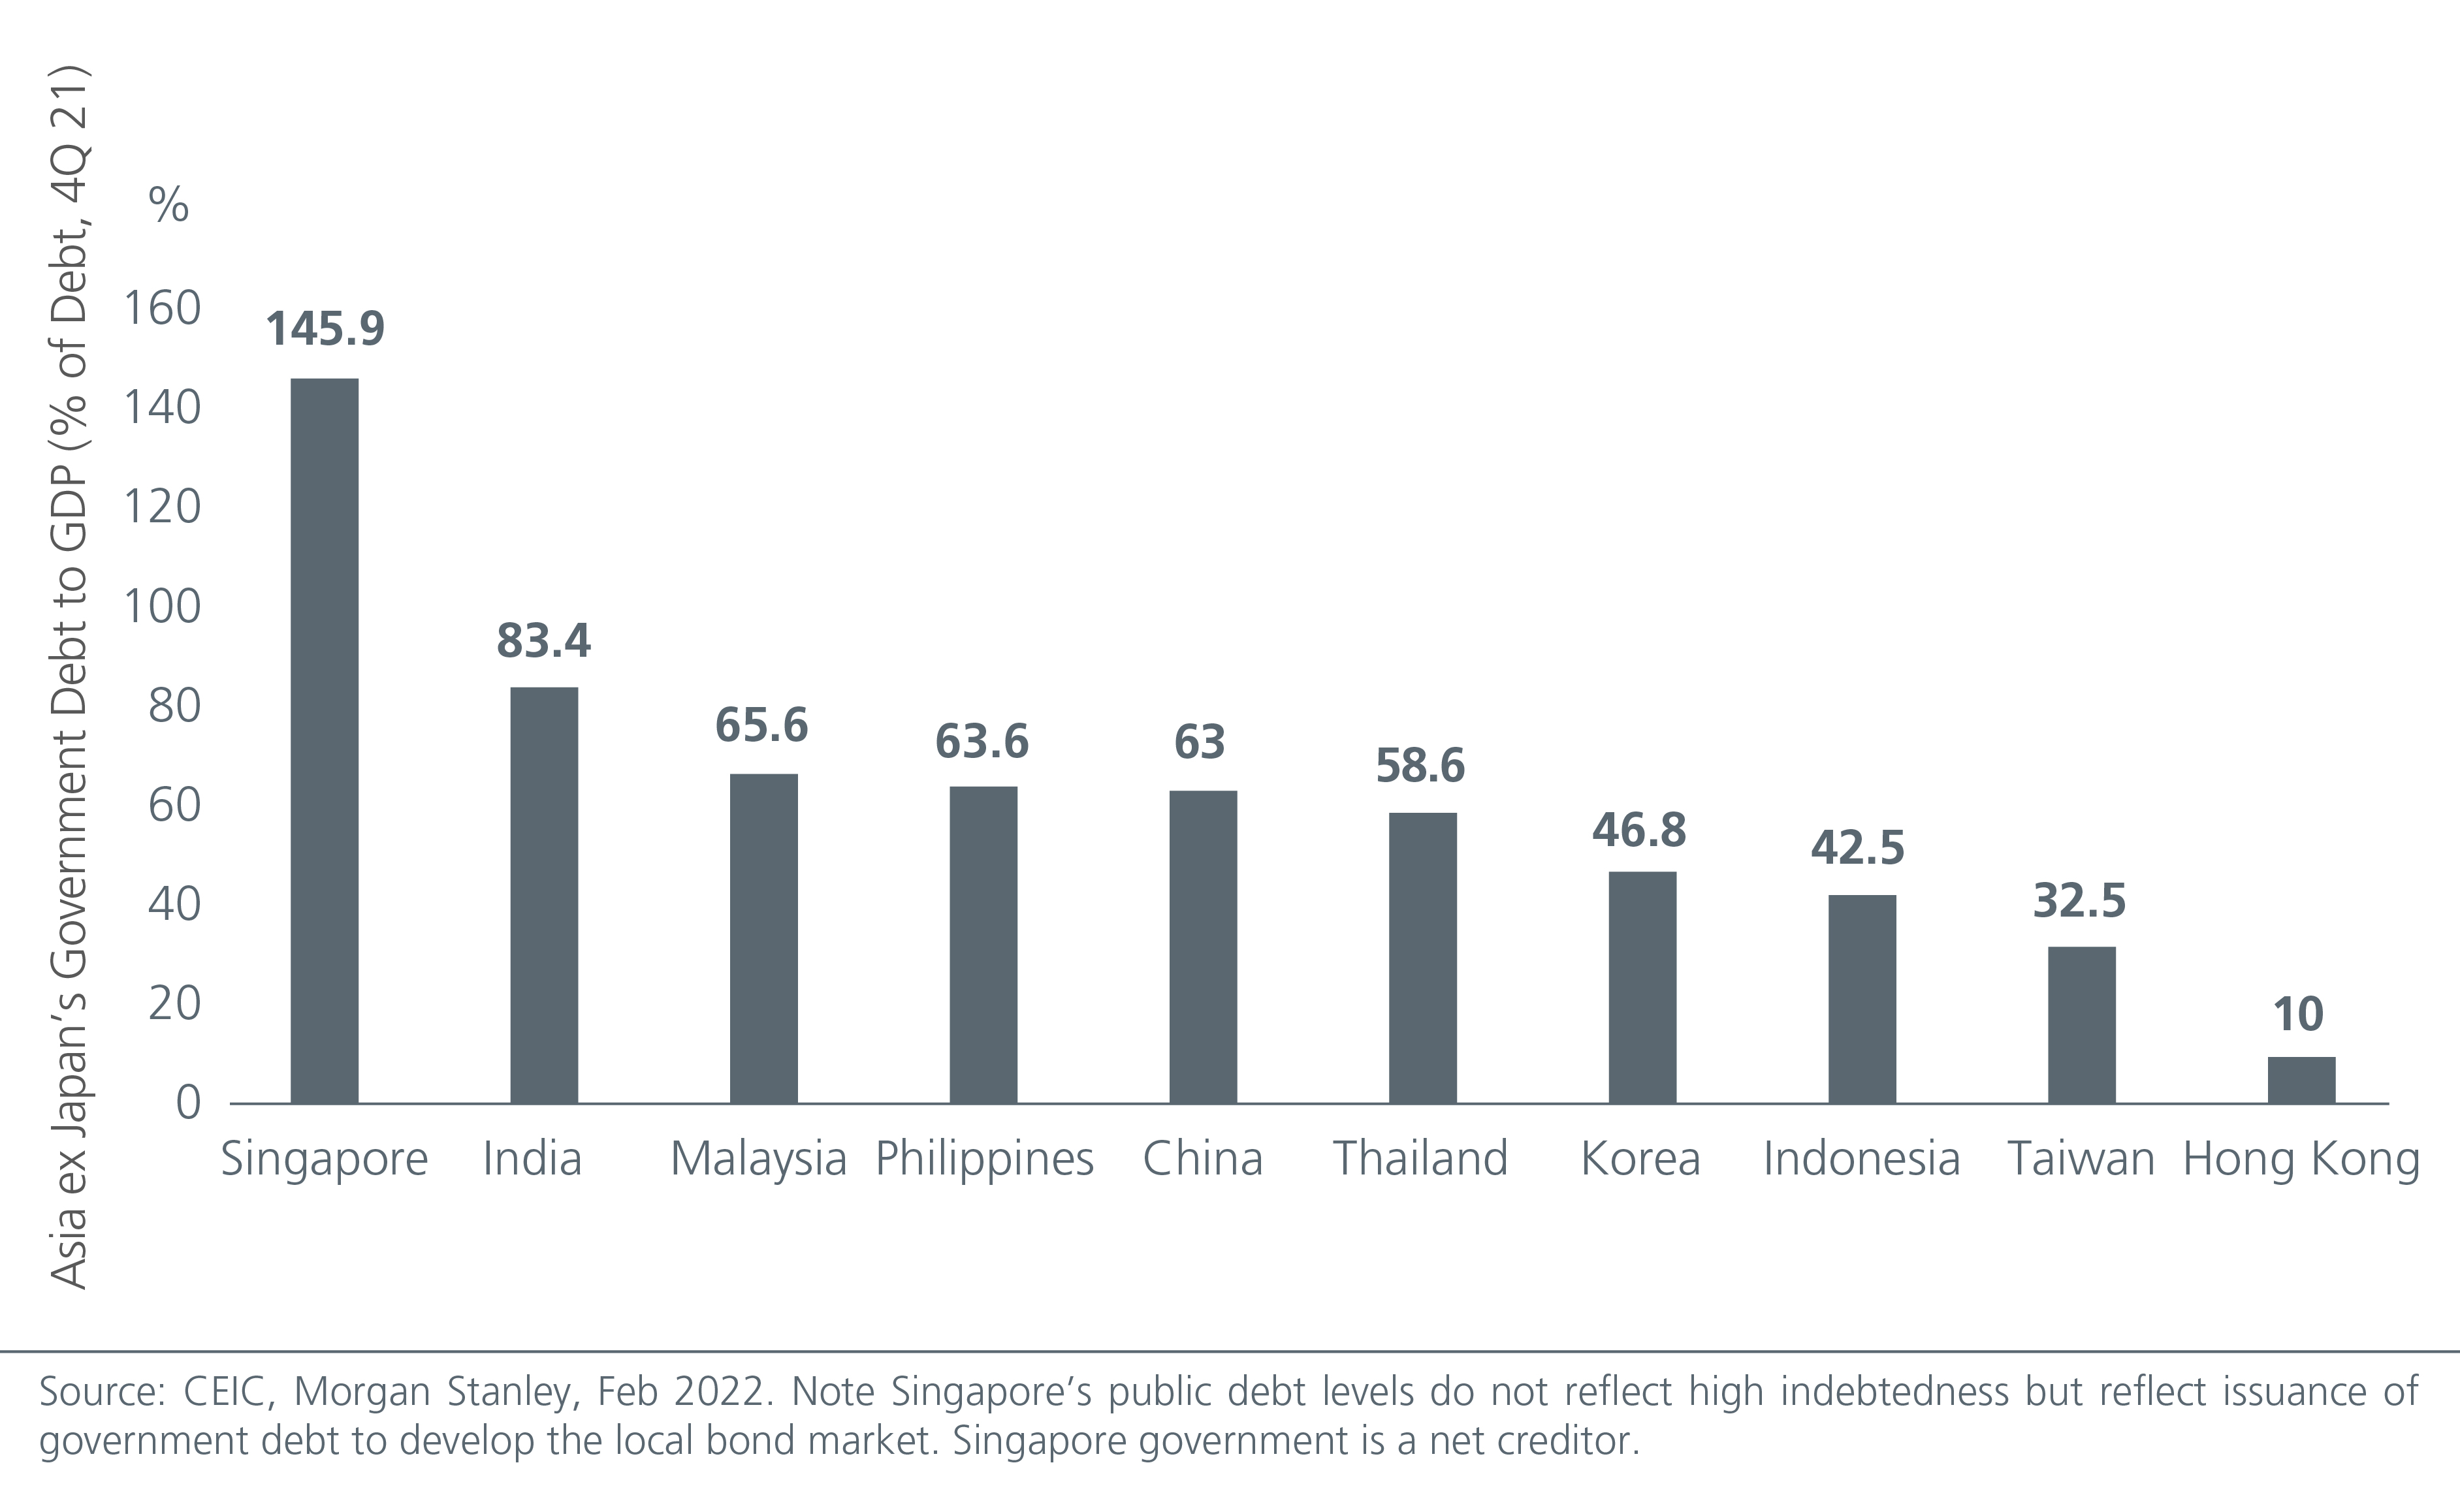 Asian governments’ debt ratios are favourable